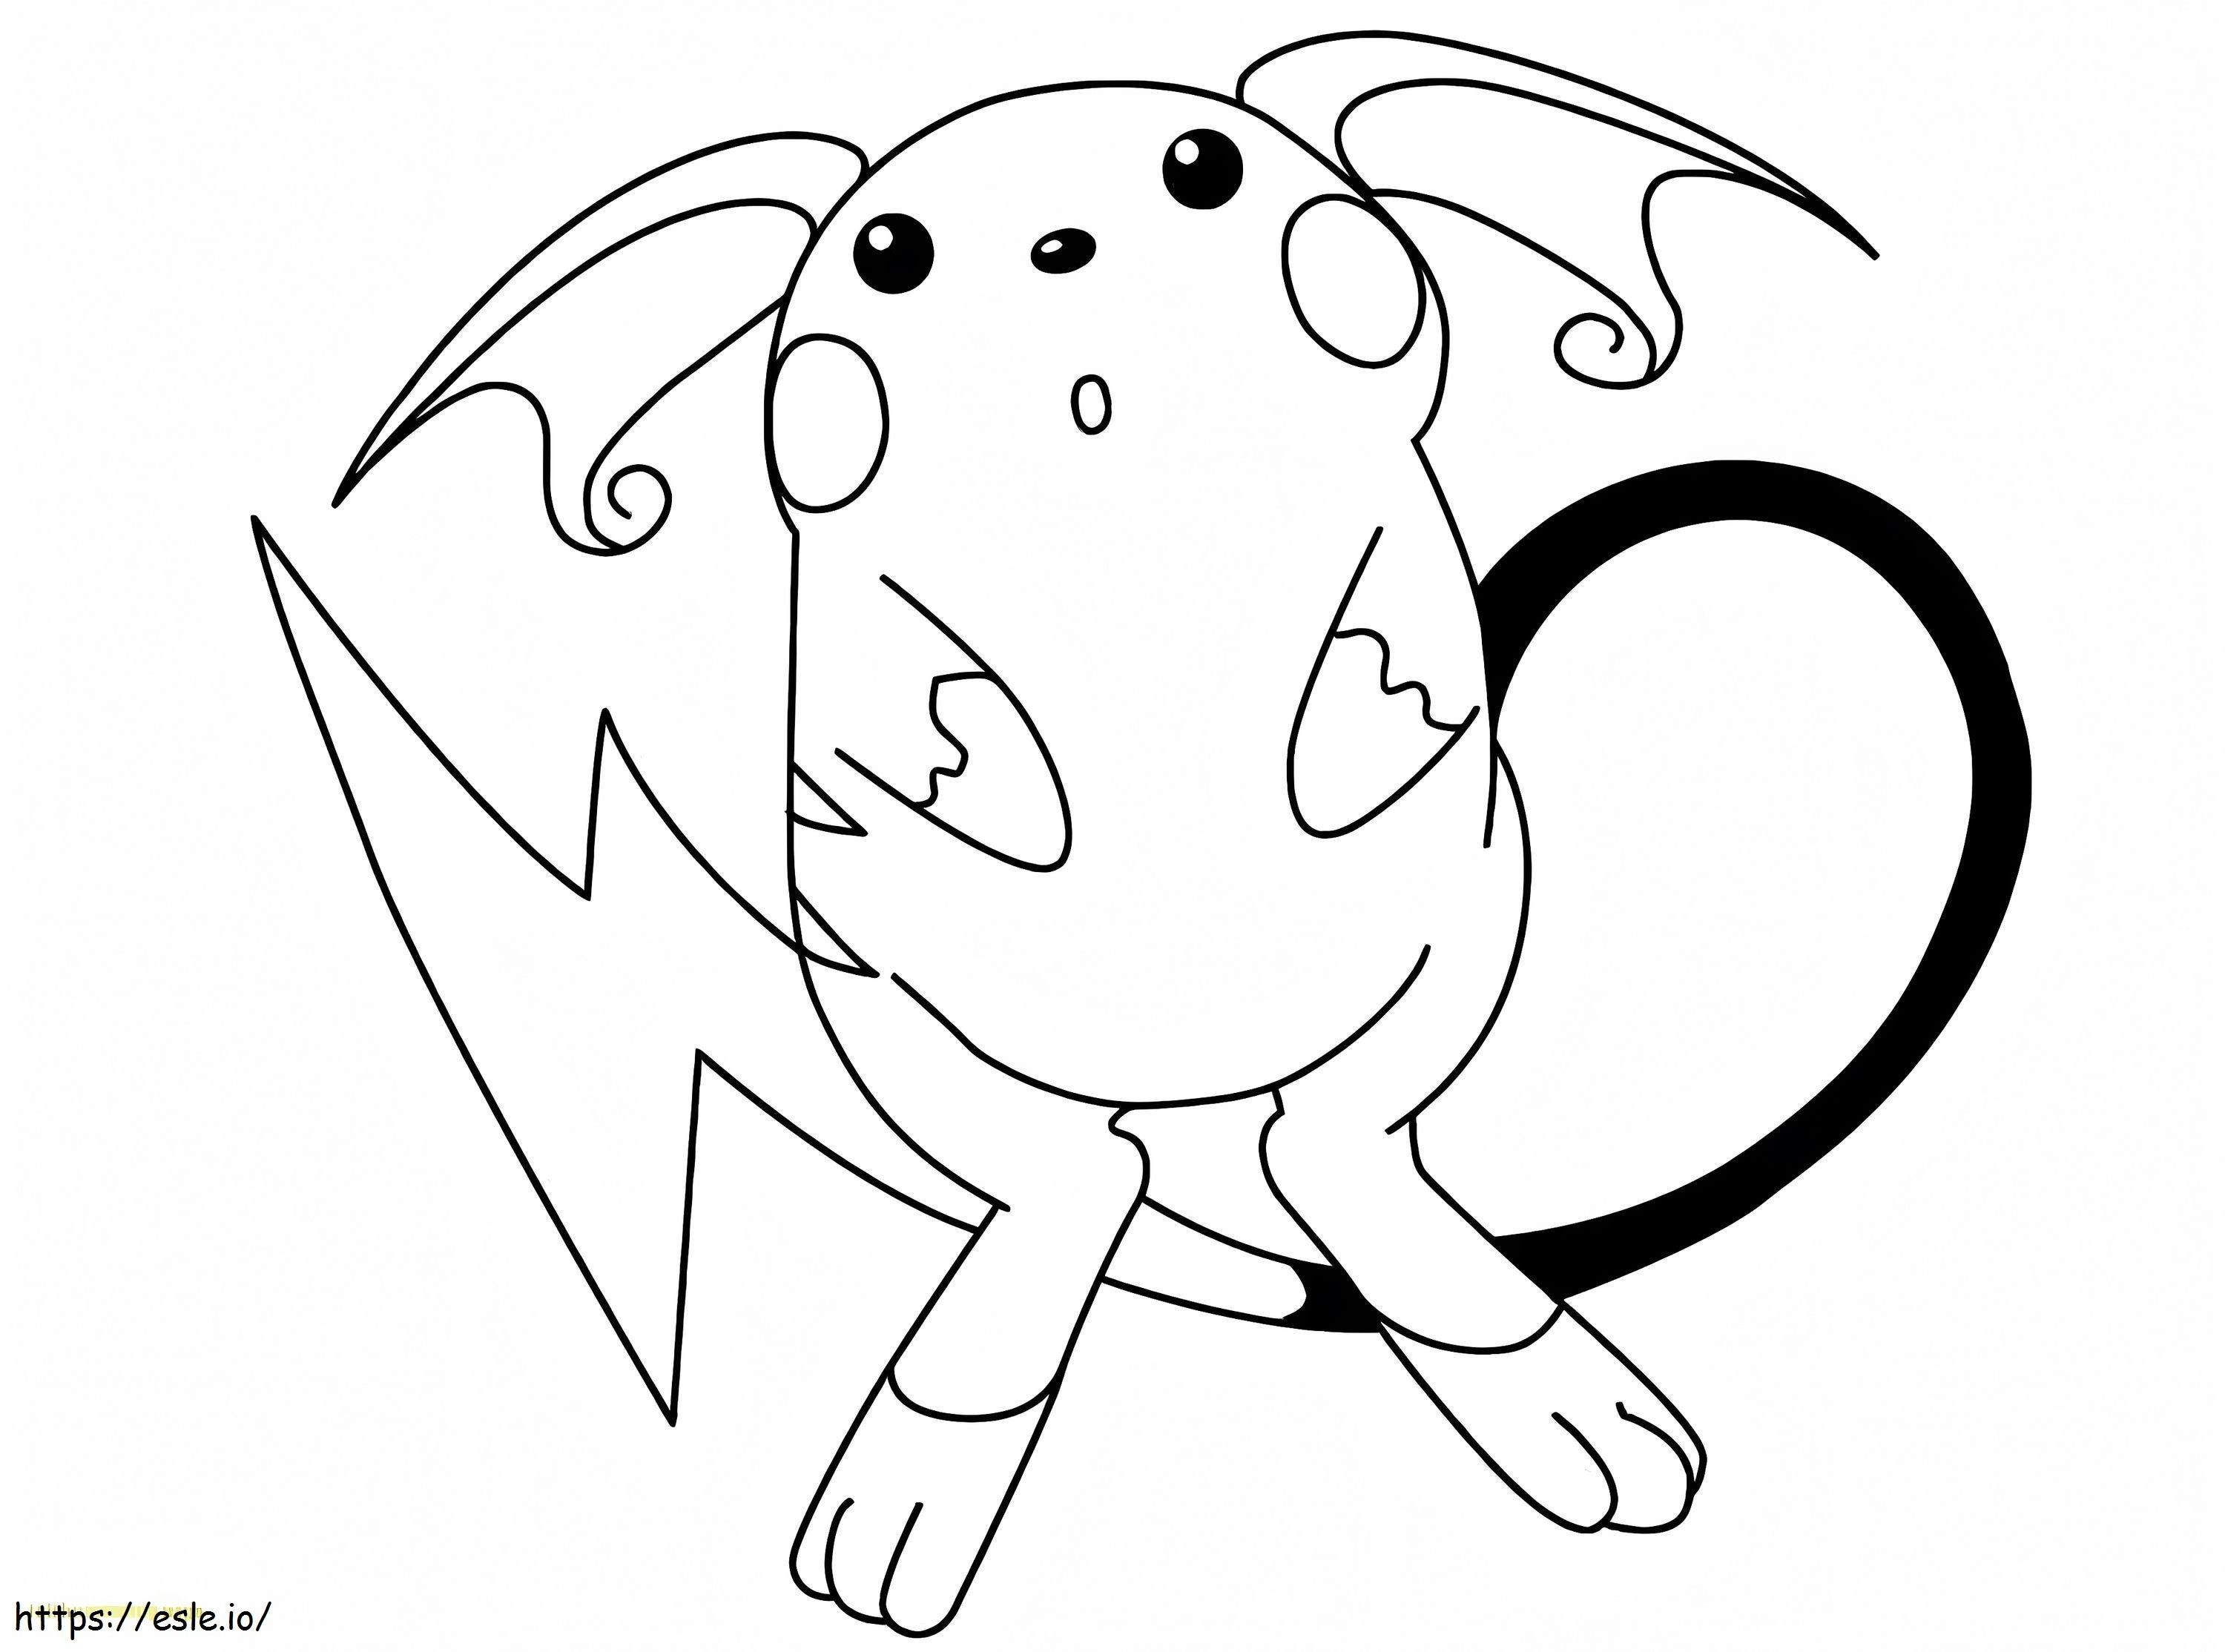 Lovely Raichu coloring page